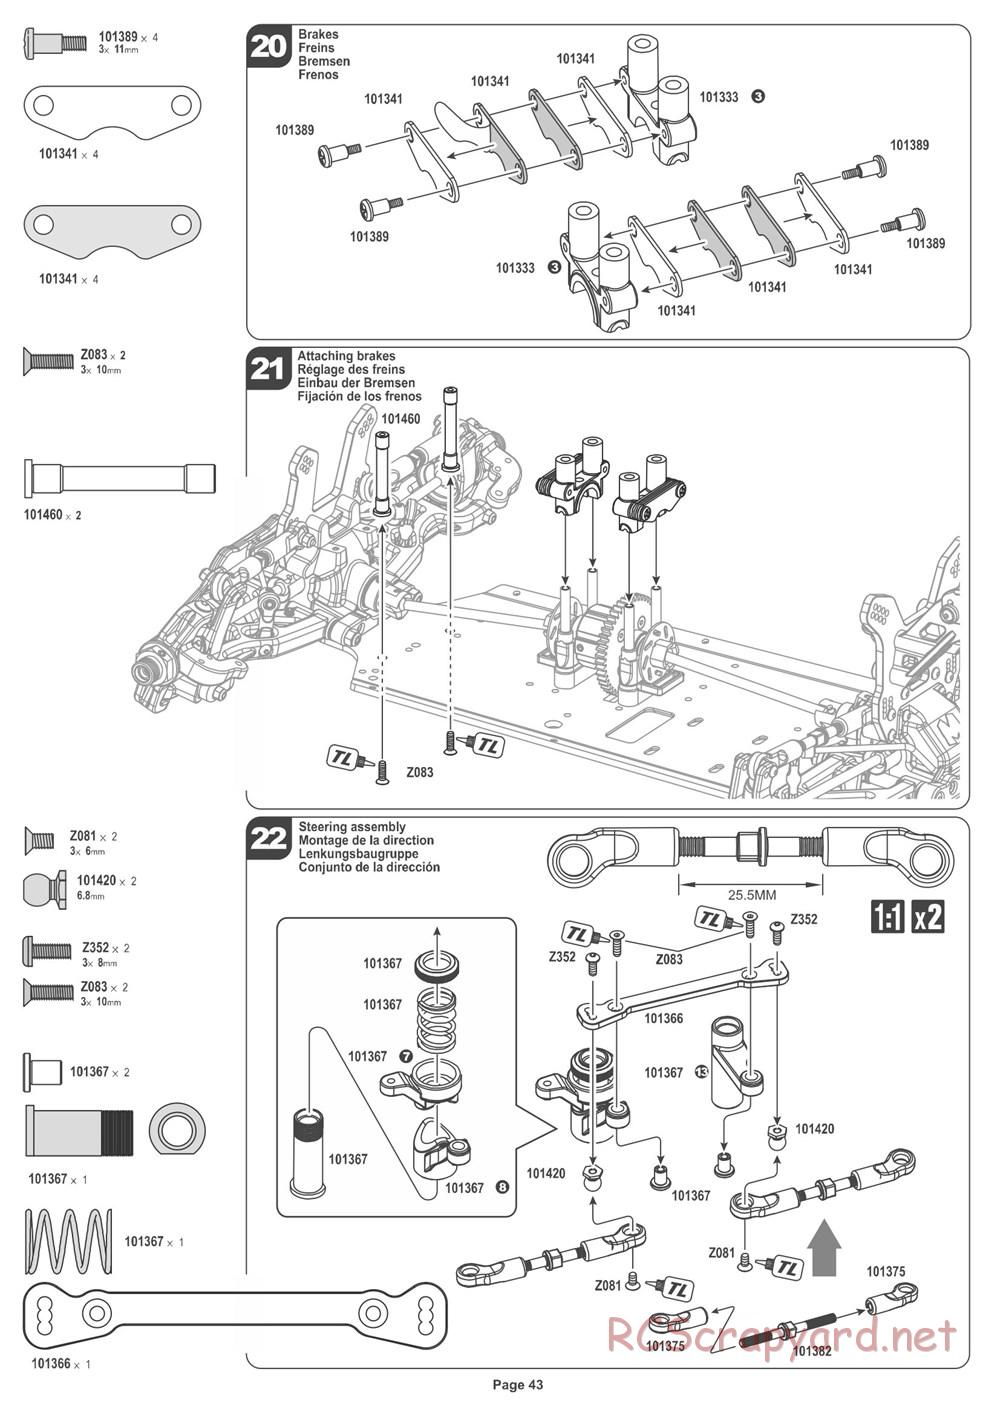 HPI - Pulse 4.6 Buggy - Manual - Page 43